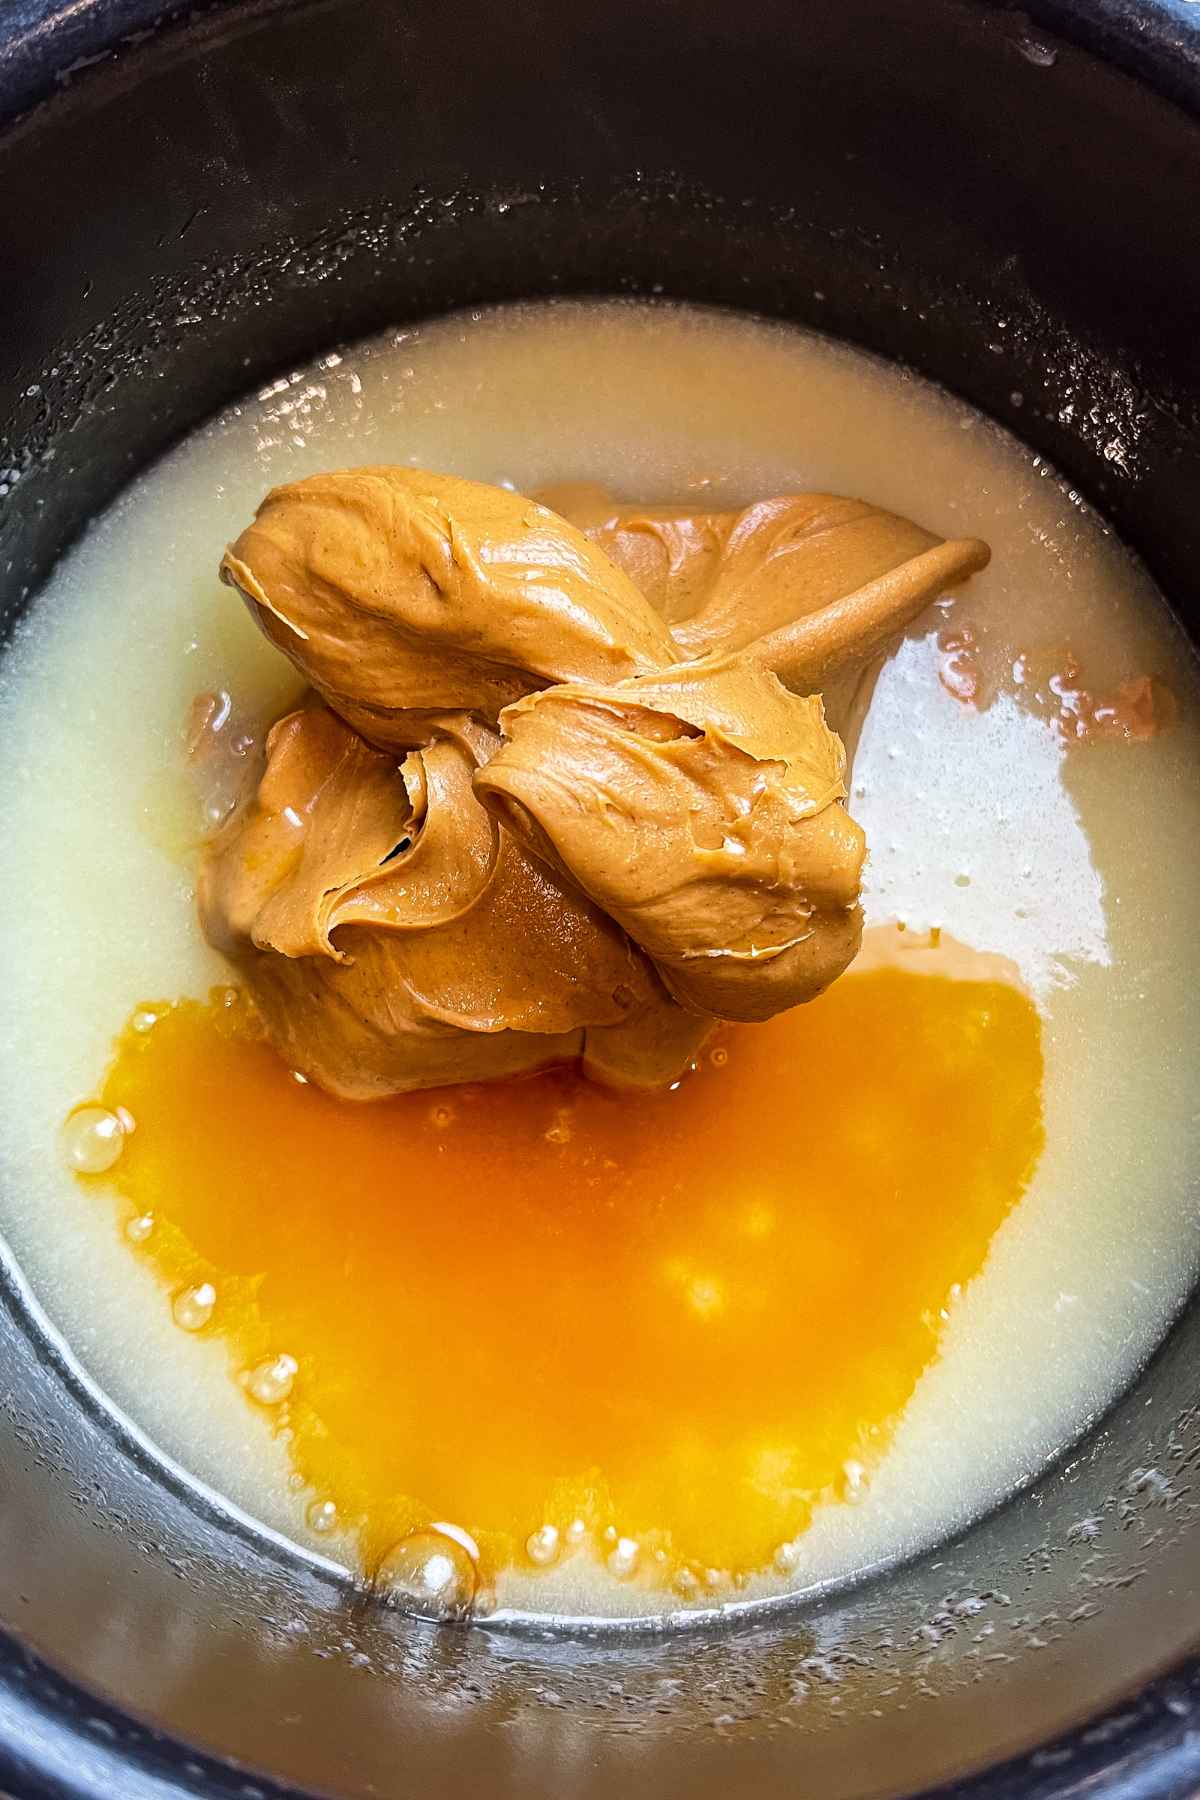 Peanut butter and vanilla on top of boiled sugar mixture in a saucepan.